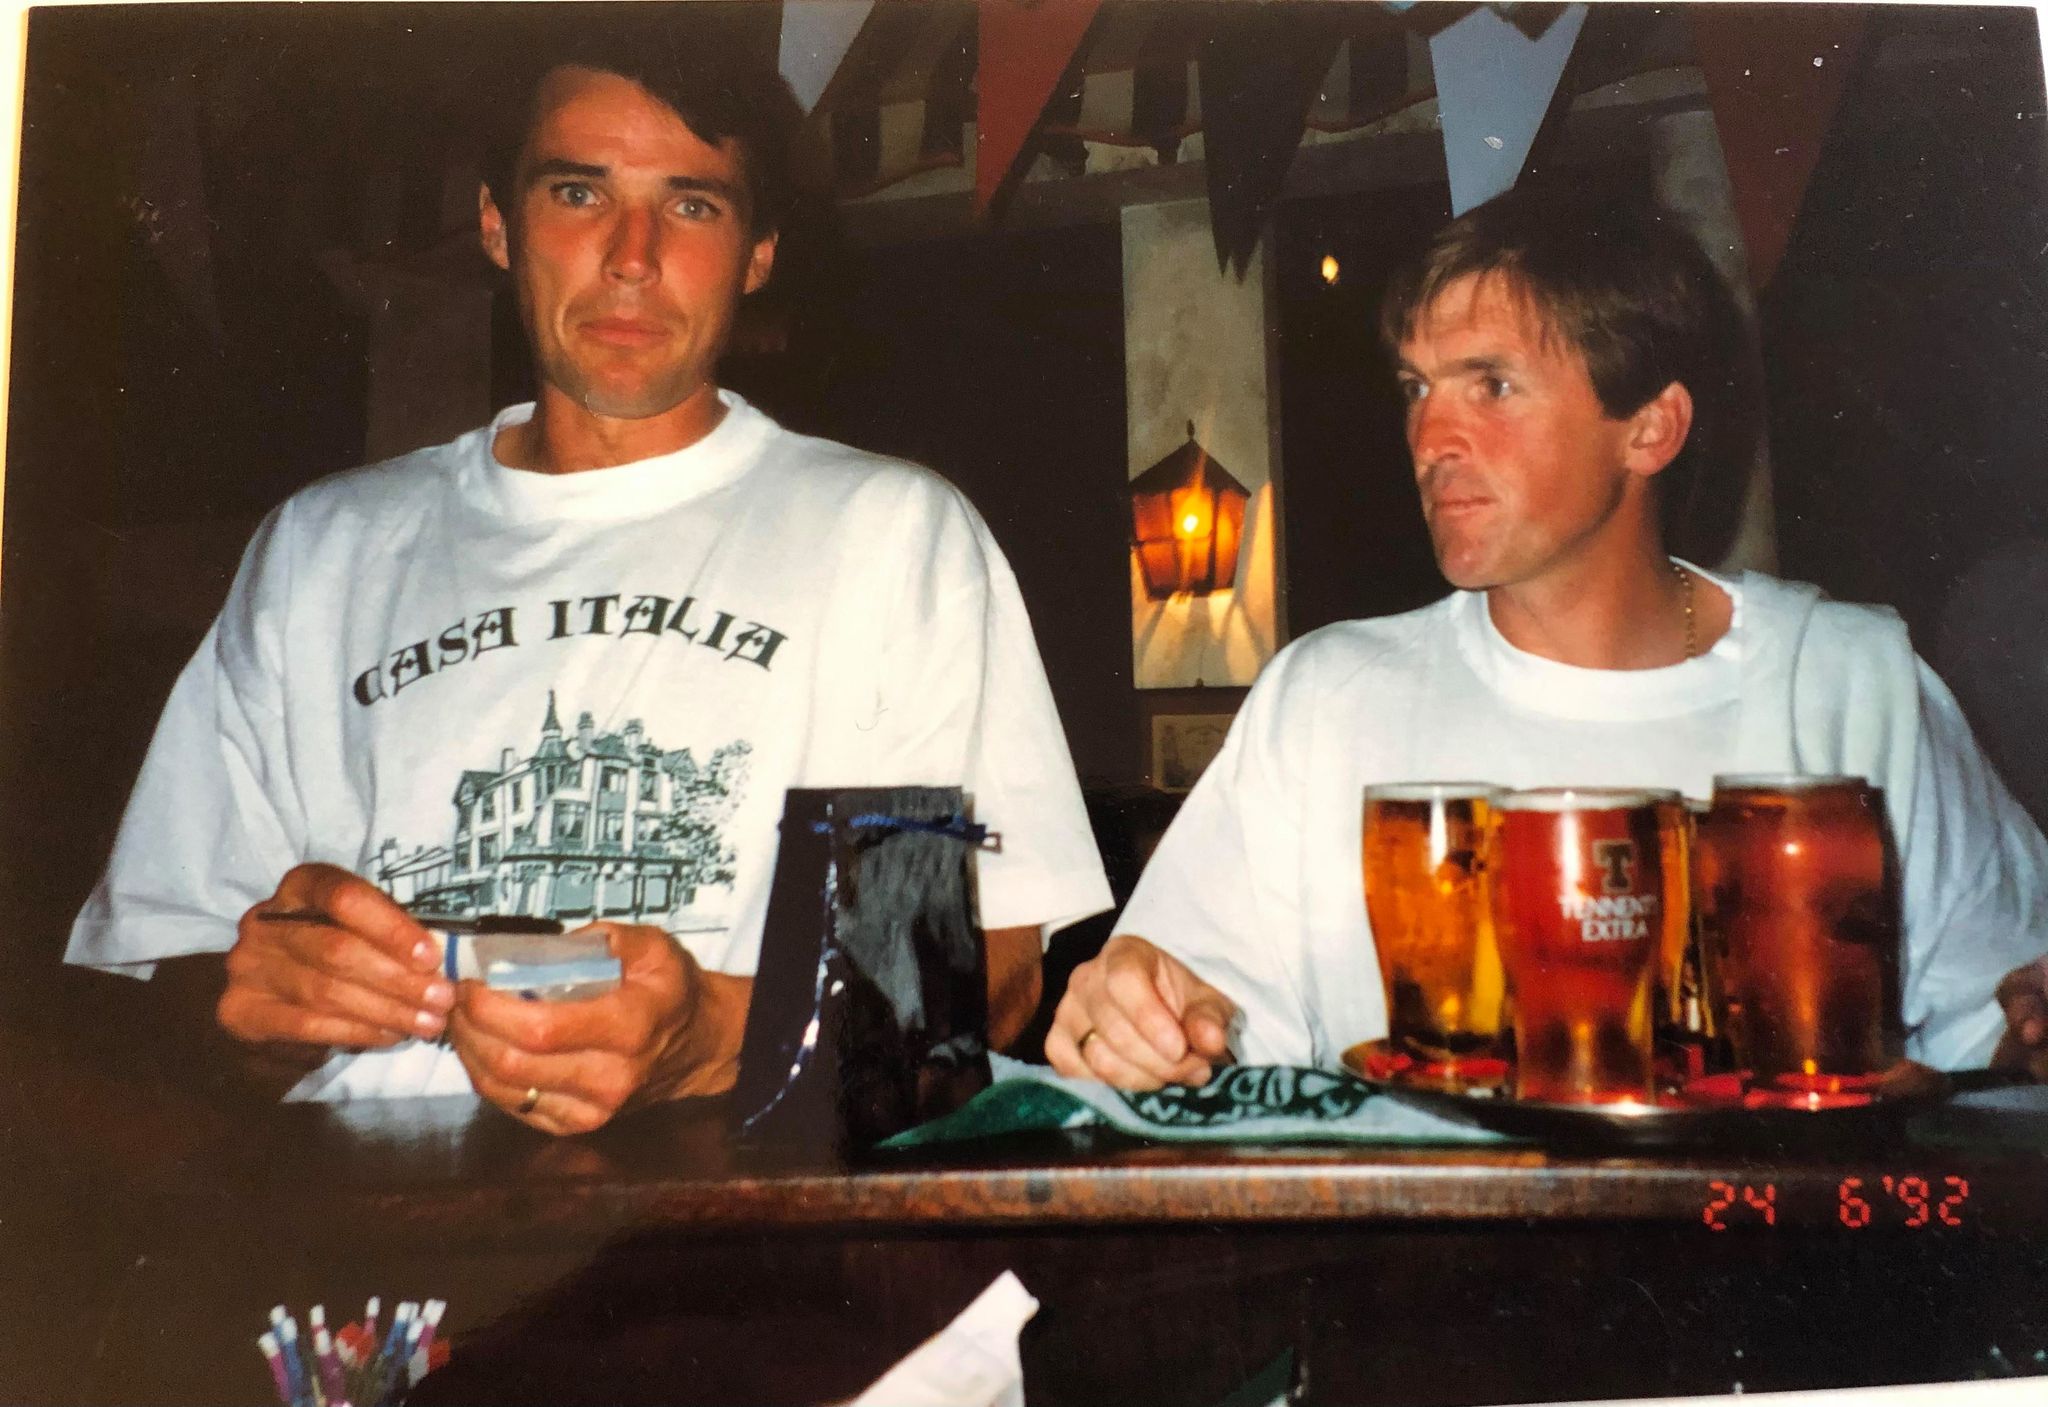 Liverpool FC footballers Alan Hansen and Kenny Dalglish served as waiters at Casa Italia restaurant in Southport to help raise money for charity